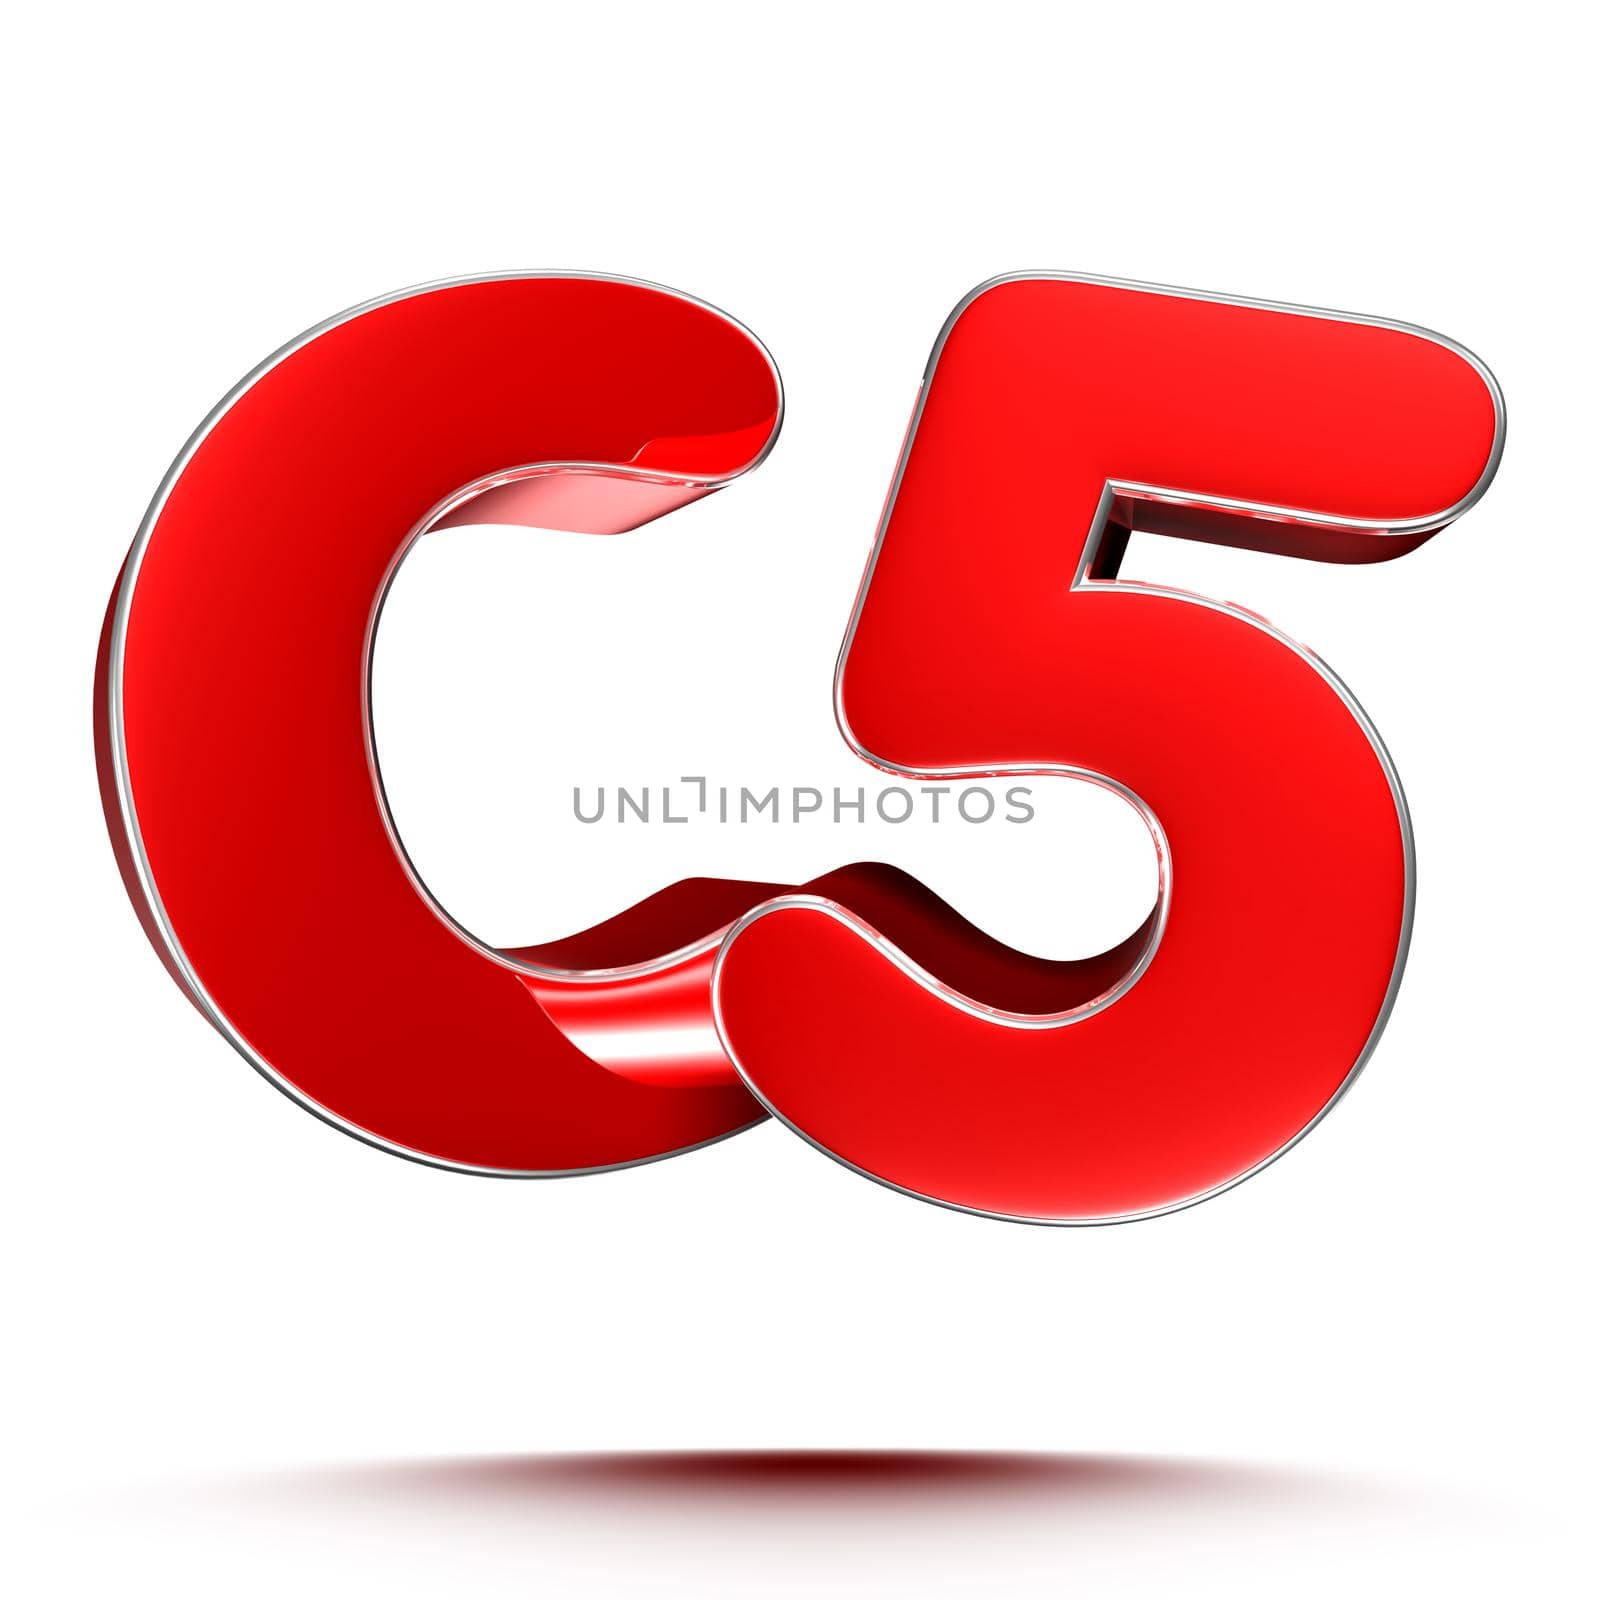 C5 red 3D illustration on white background with clipping path.